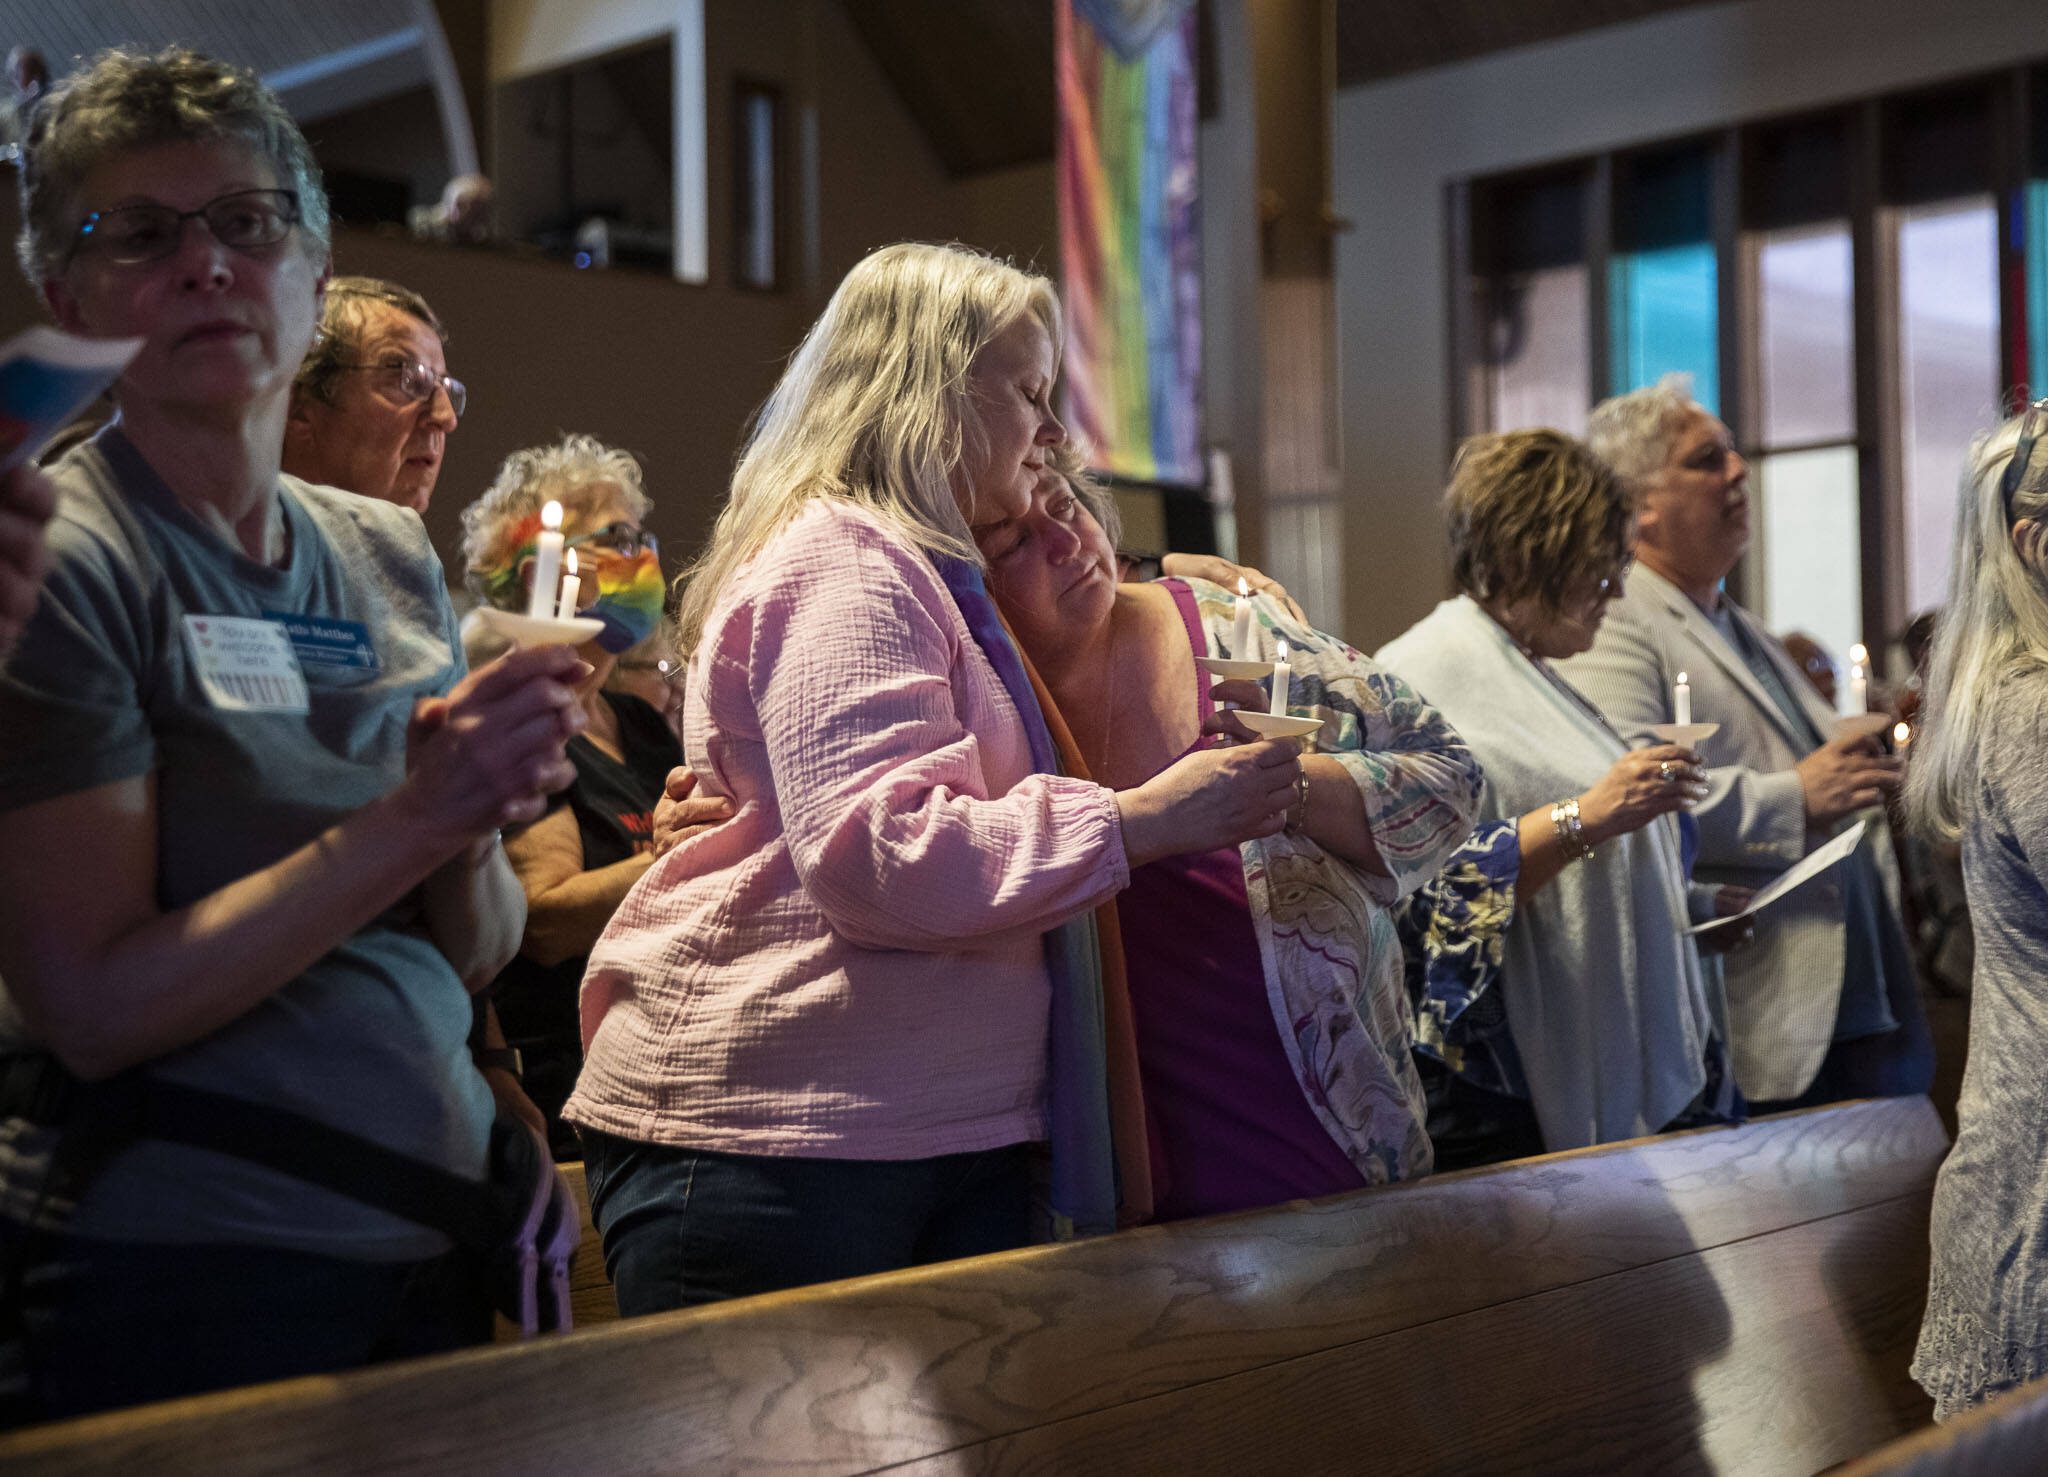 Anne Long, left, and Stacy Miller, right, embrace while singing “We Shall Overcome” during a vigil held to support the LGBTQIA+ community in response to the recent hate-filled incidents at two regional churches on Tuesday, May 2, 2023 in Edmonds, Washington. Long, from Seattle and Miller, from Ferndale, both felt it was important to attend to “show support”. (Olivia Vanni / The Herald)